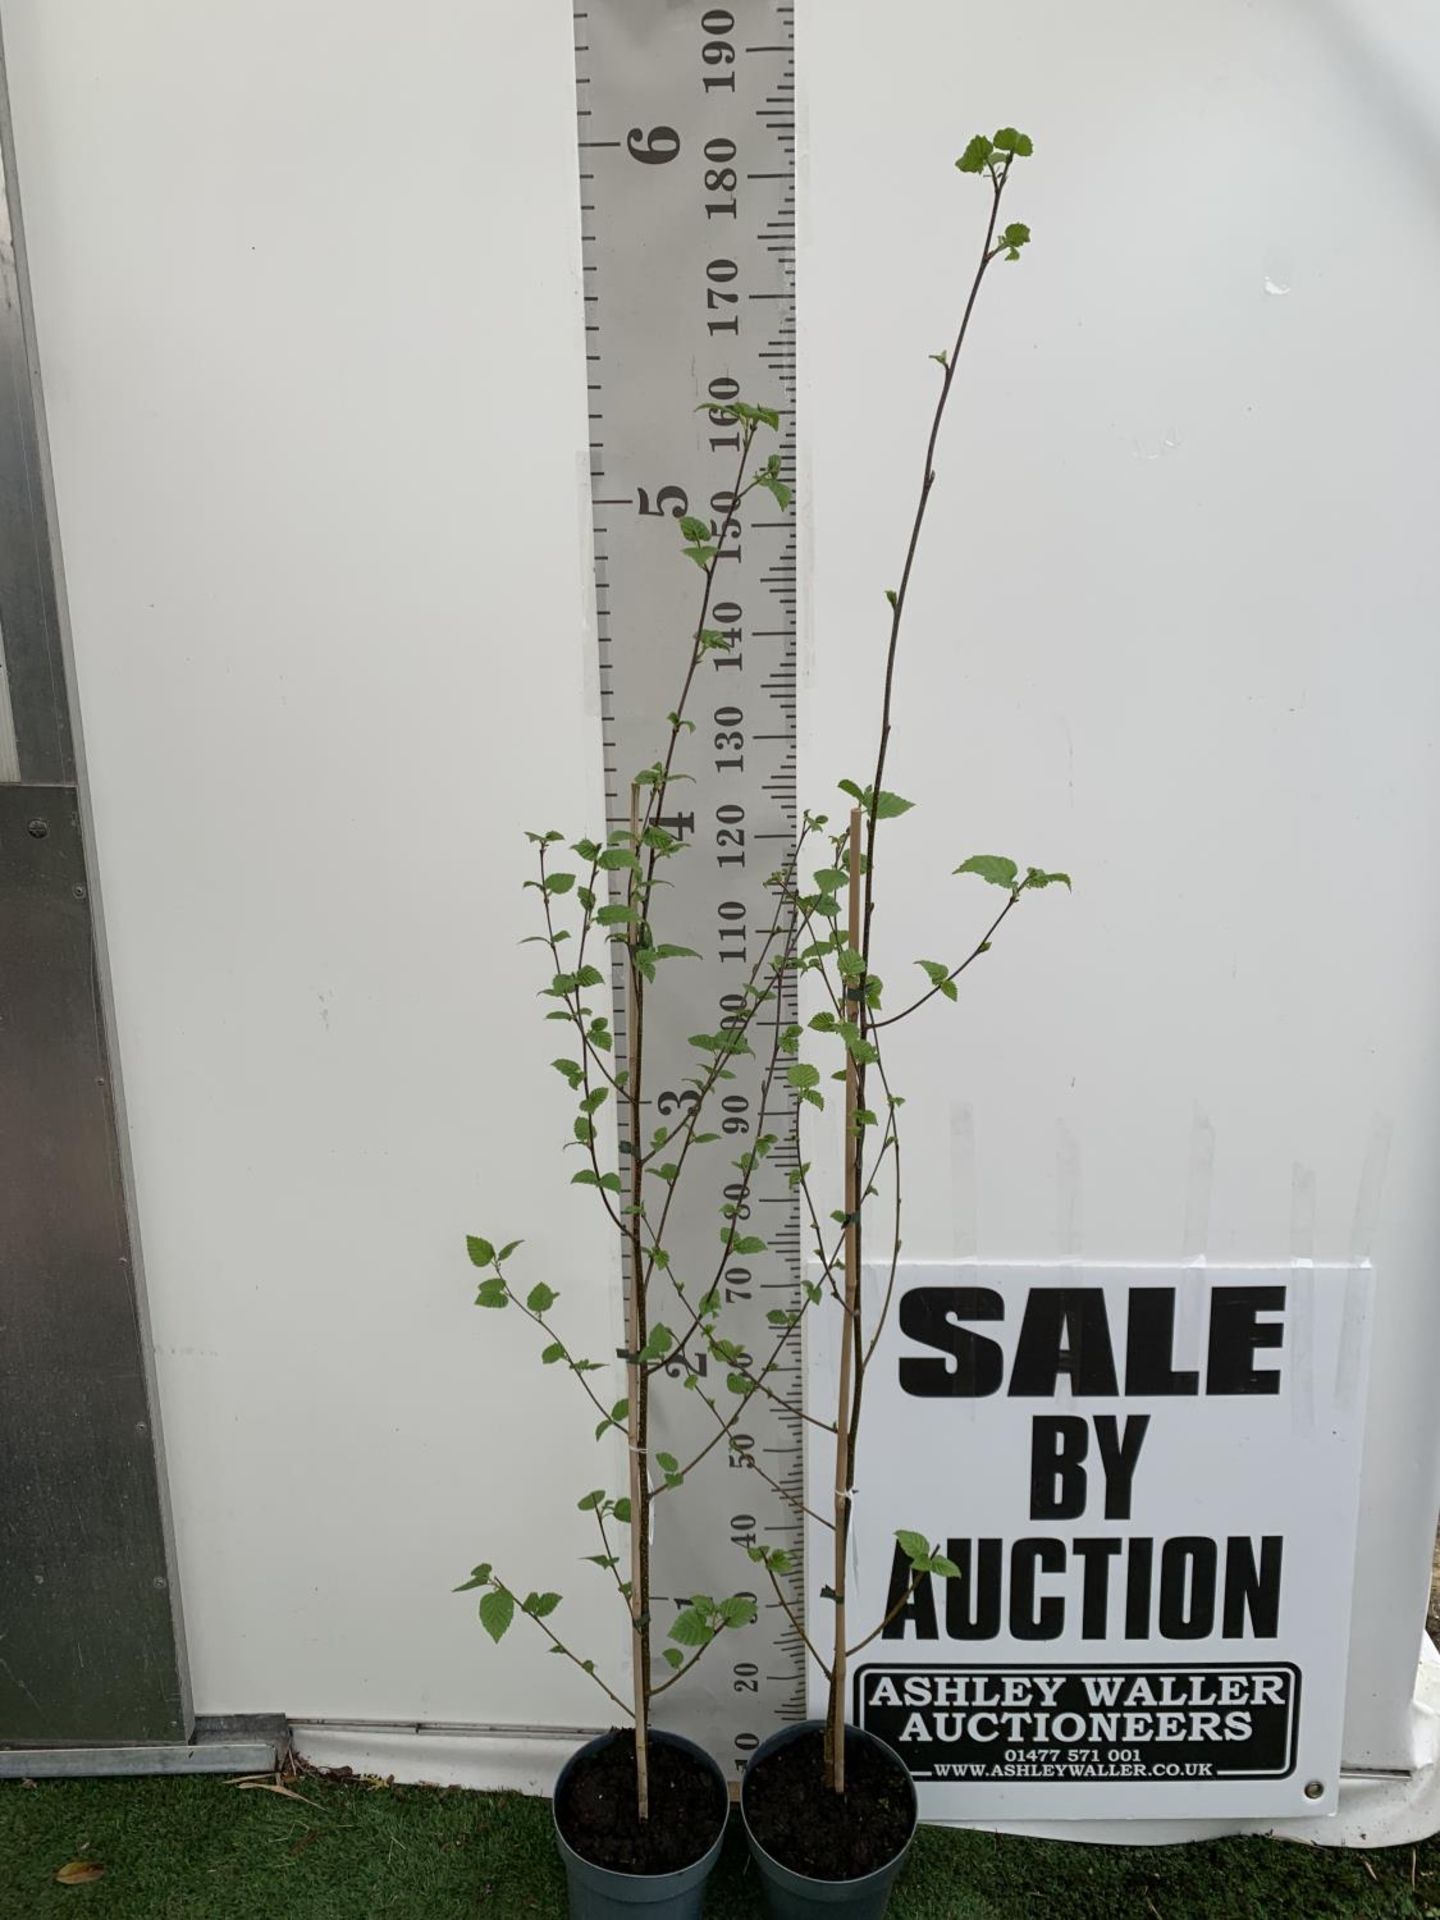 TWO BETULA UTILIS HIMALAYAN BIRCH TREES OVER 160CM IN HEIGHT PLUS VAT IN 3 LTR POTS